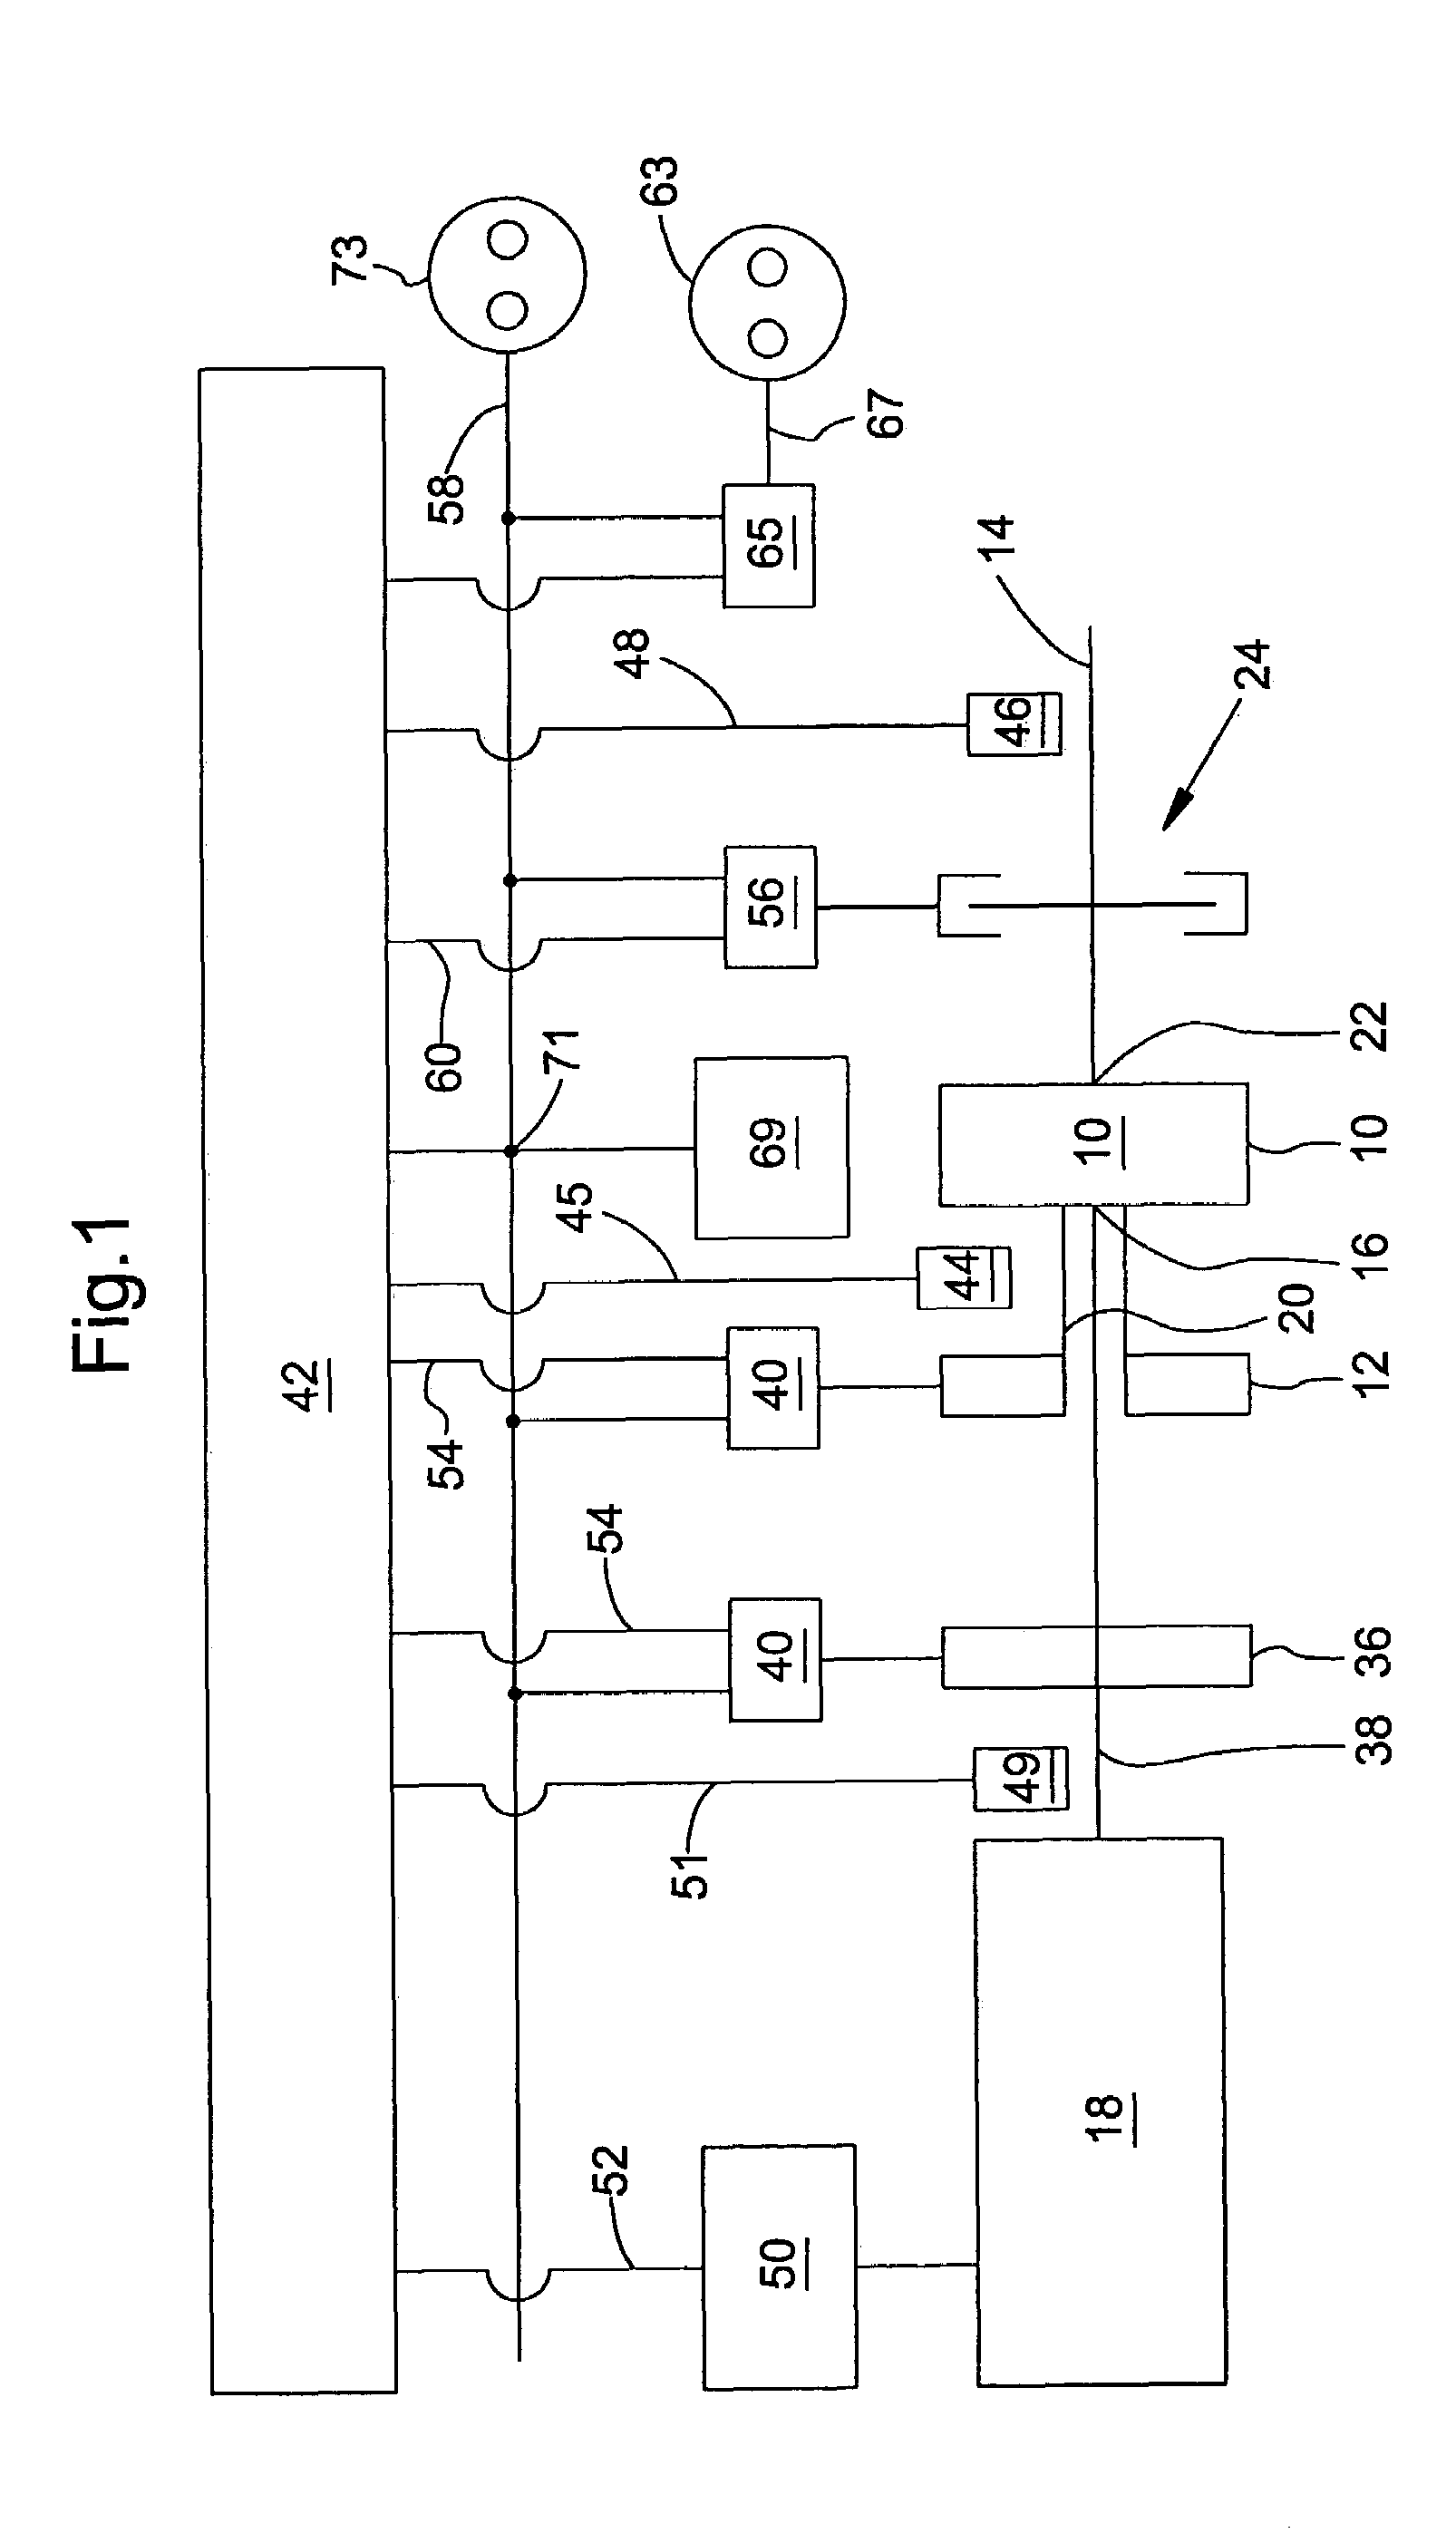 Drive arrangement for the drive of attached implements for a vehicle